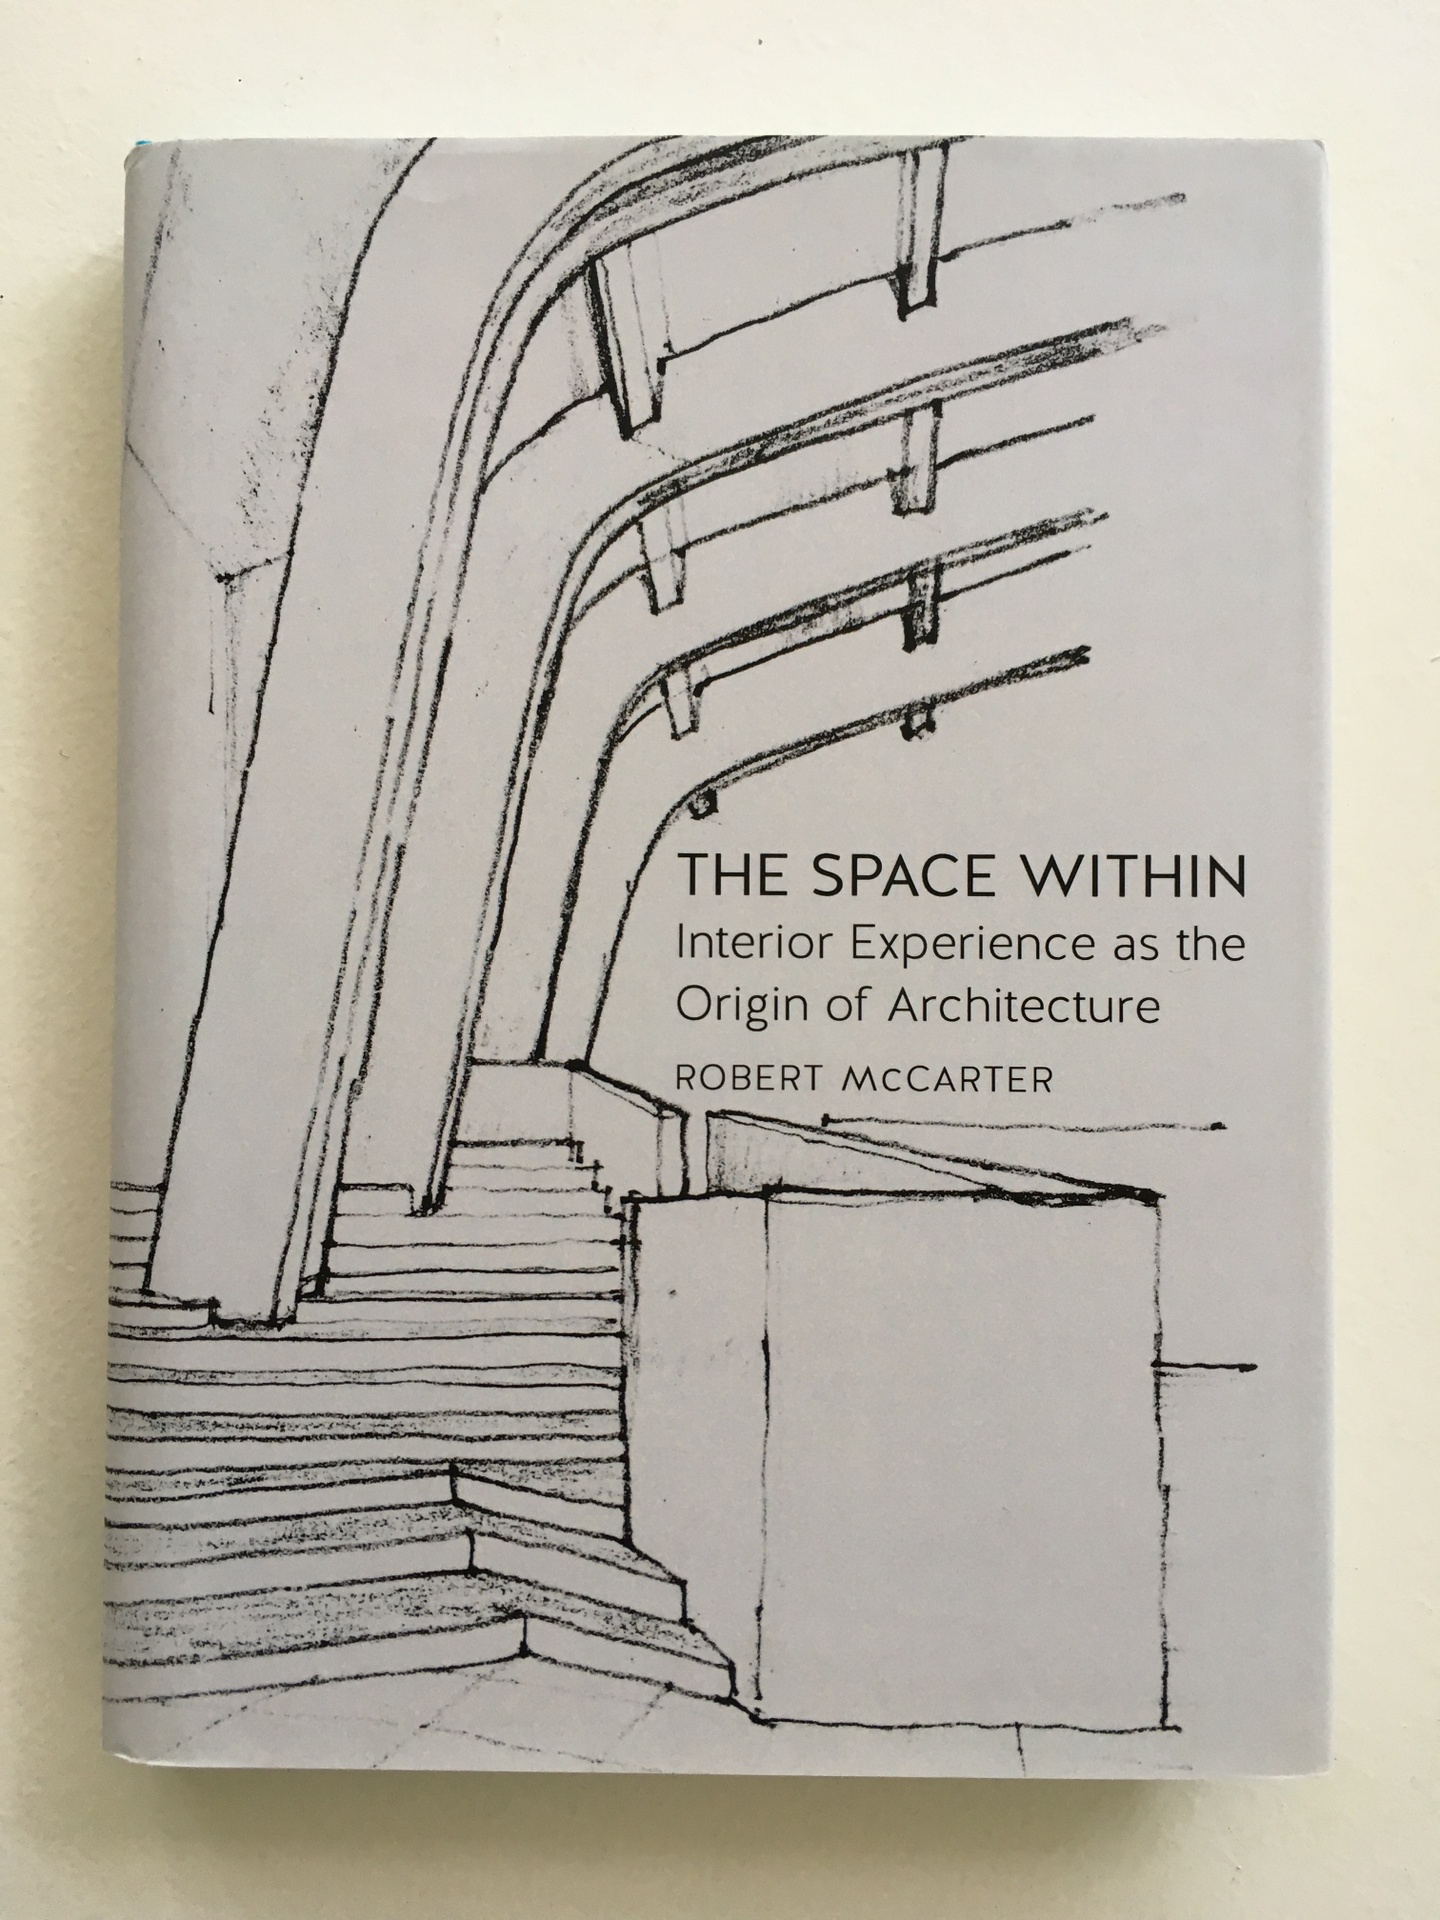 Cover of The Space Within, with a black-and-white drawing of an interior space with steps and a curved ceiling.